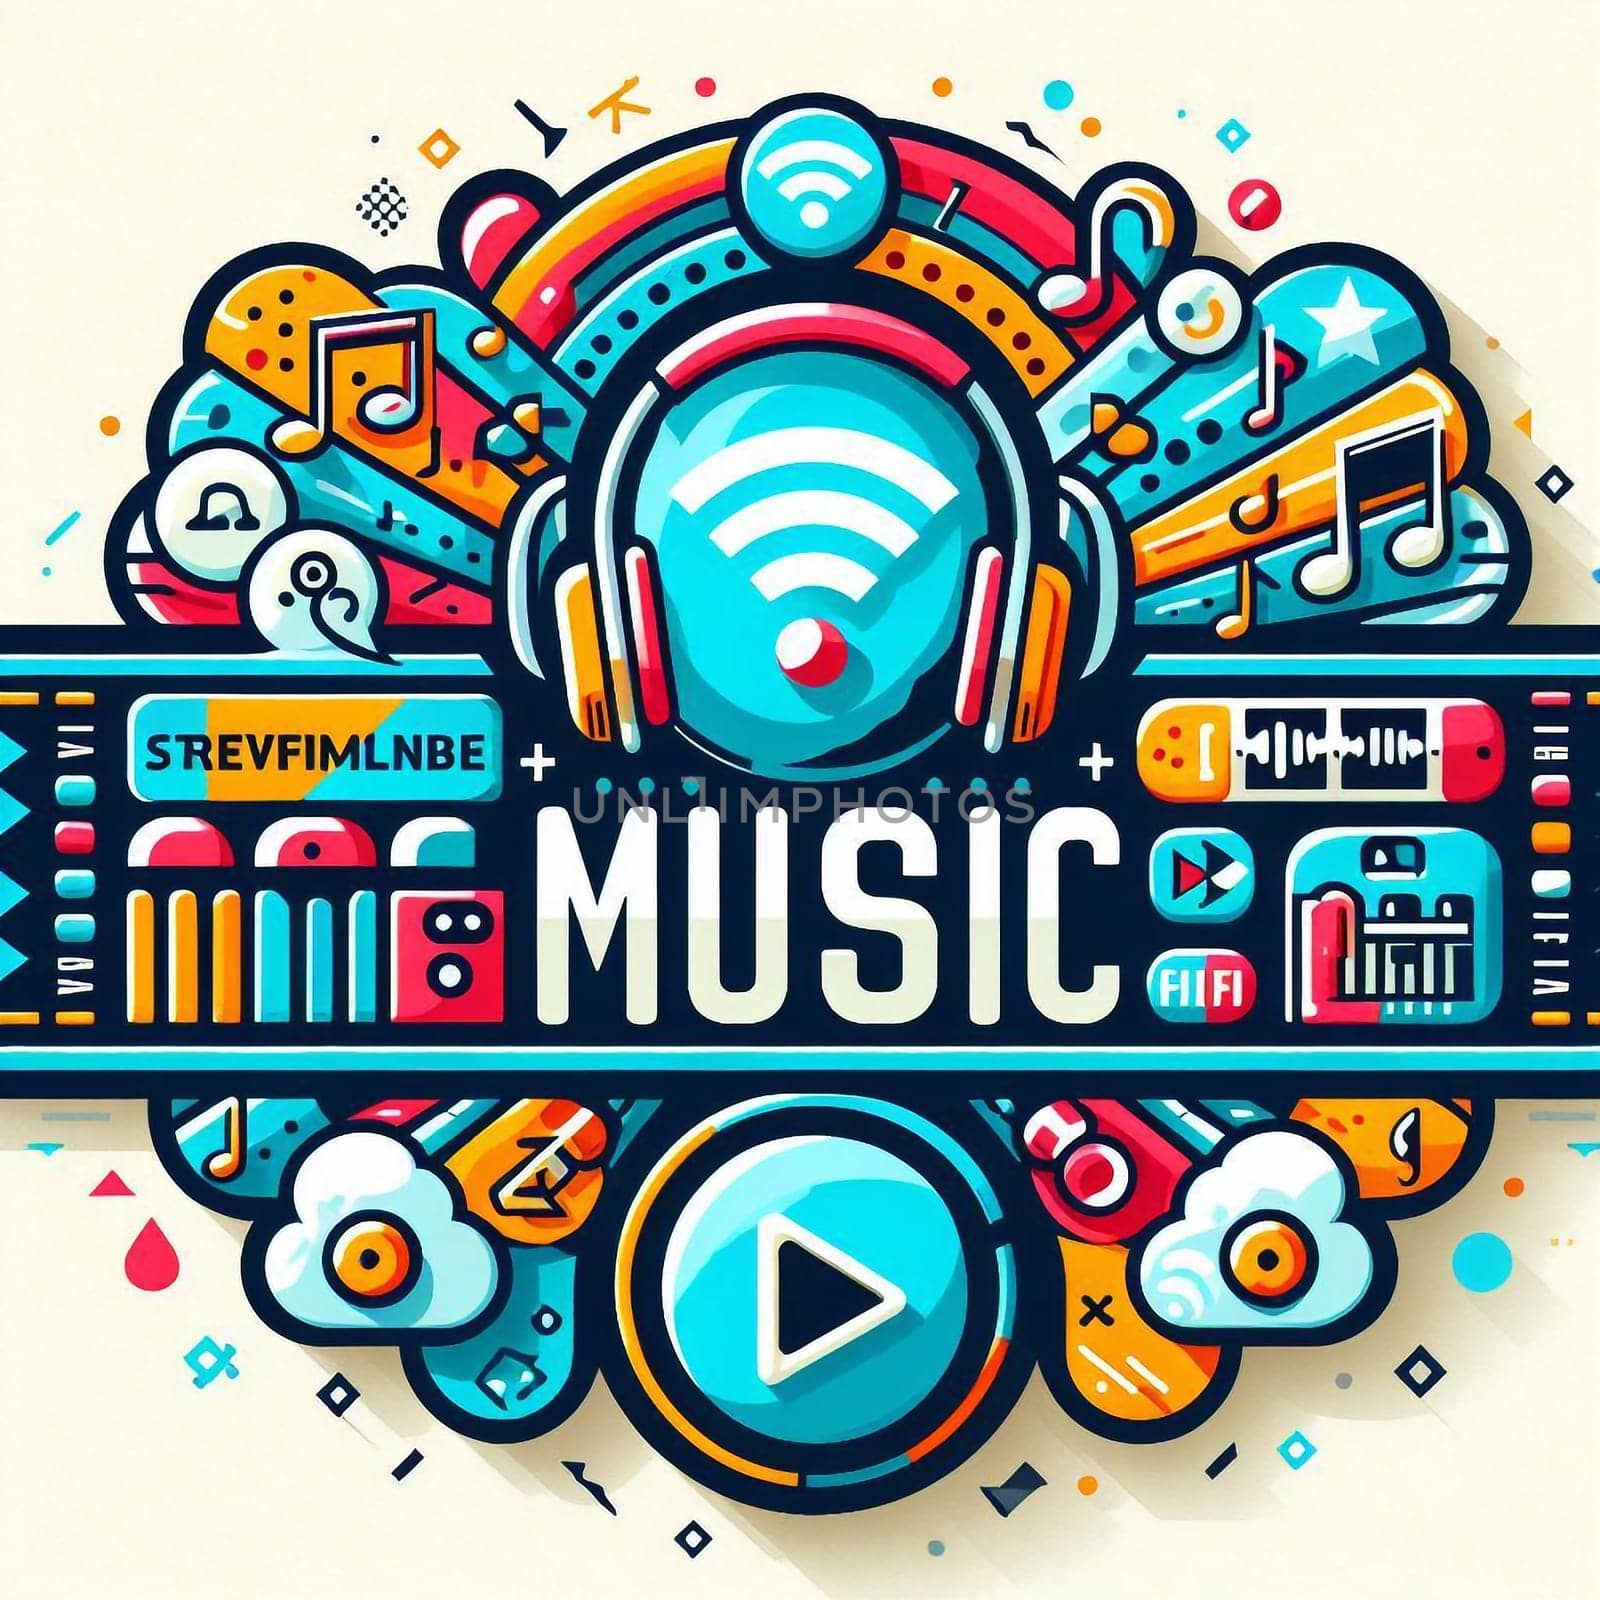 Listen to music and podcasts online logo by architectphd